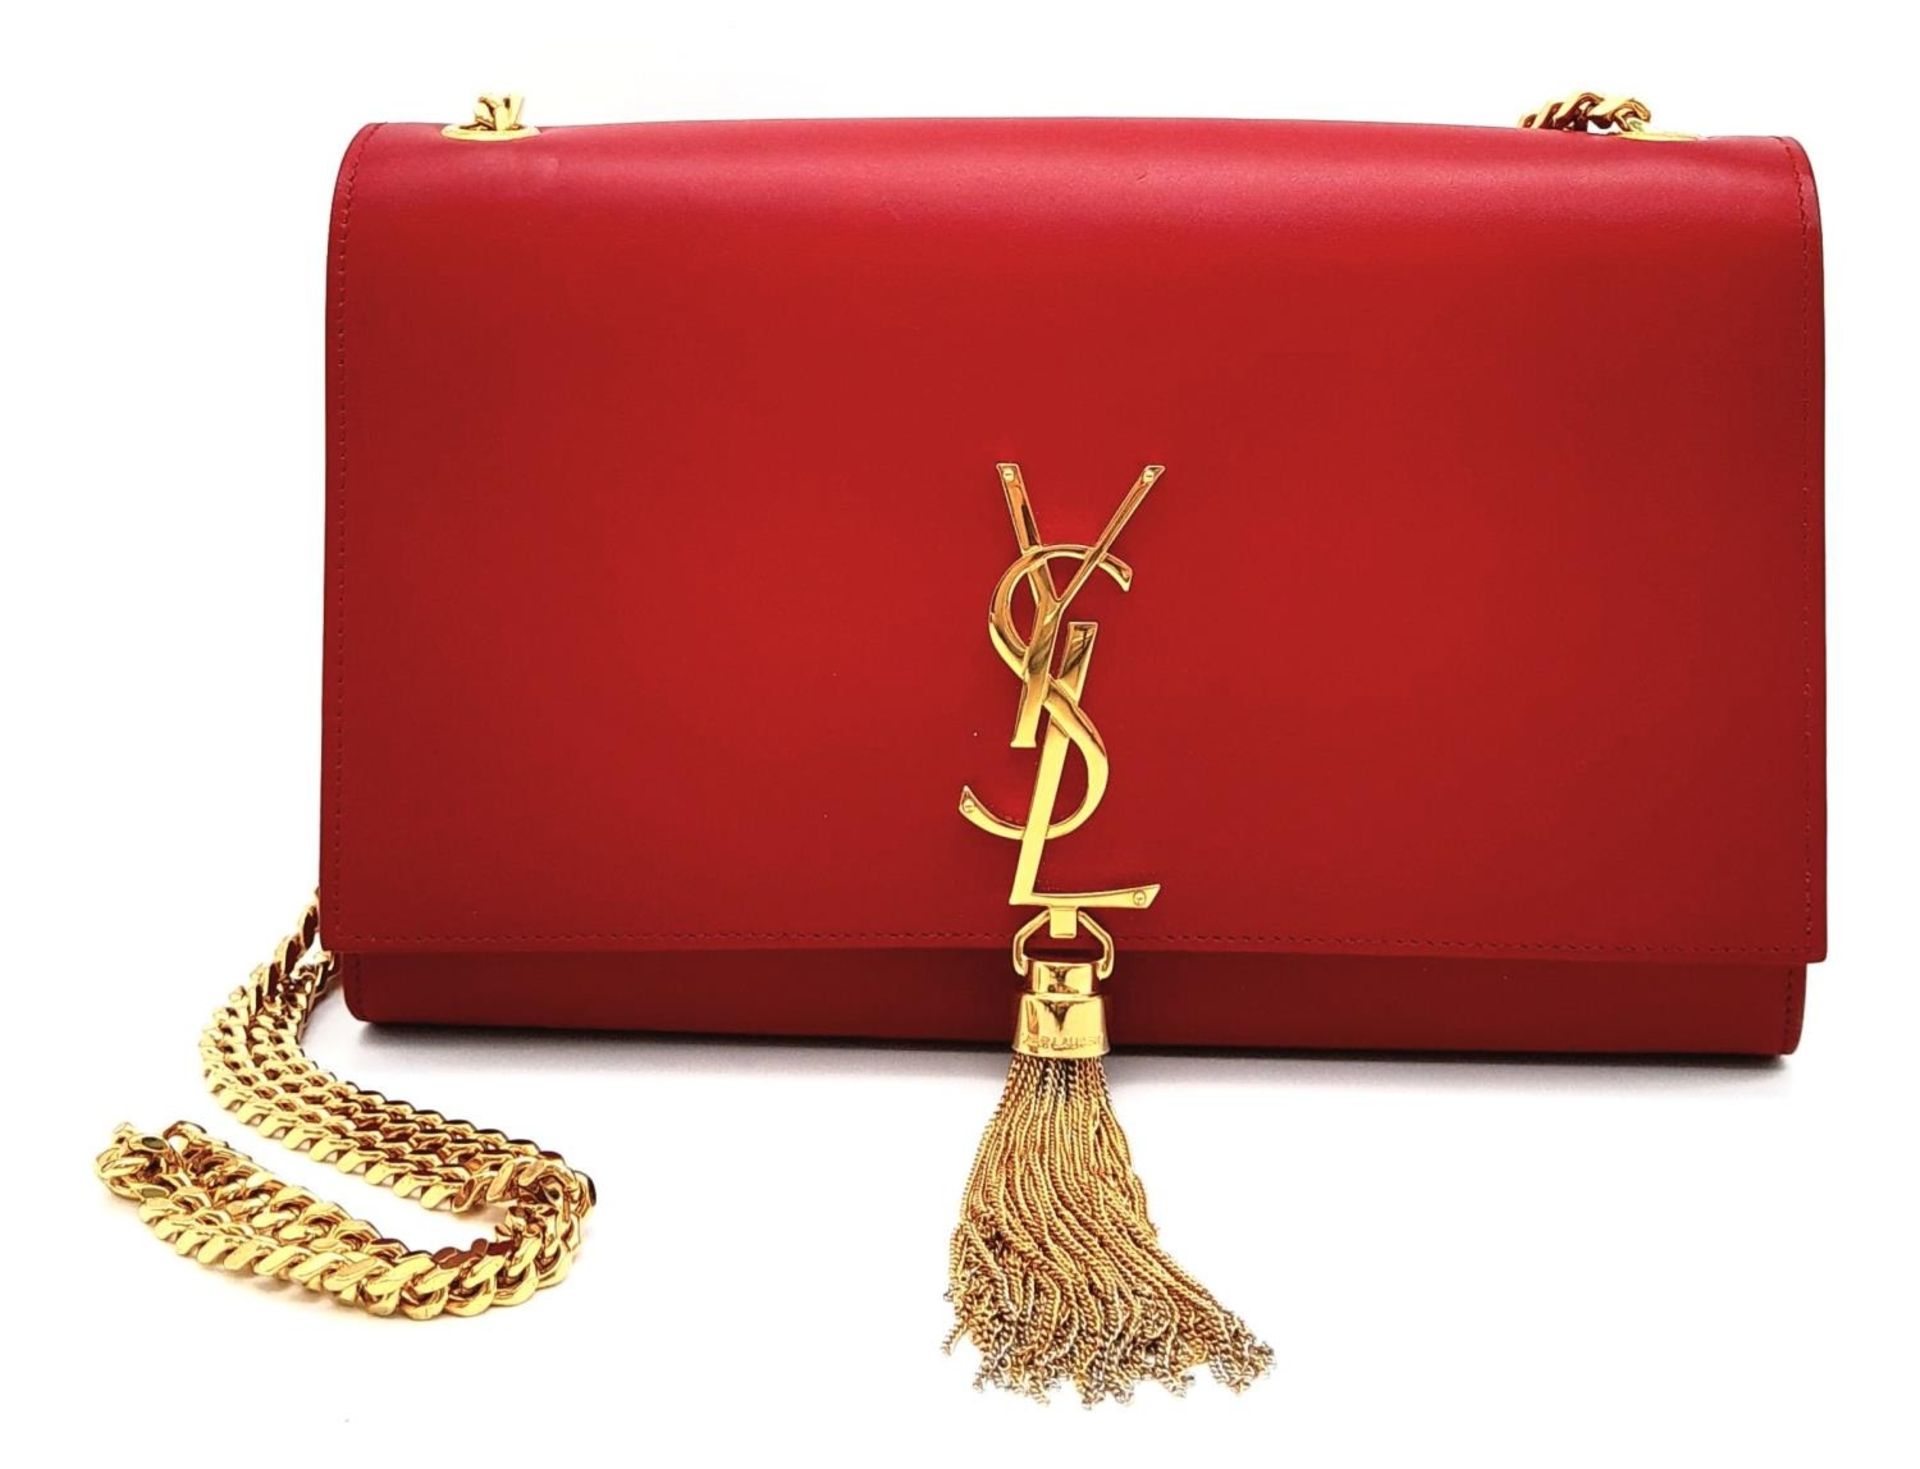 A YSL Red Kate Tassel Crossbody Bag. Leather exterior with gold-toned hardware, the iconic YSL logo,